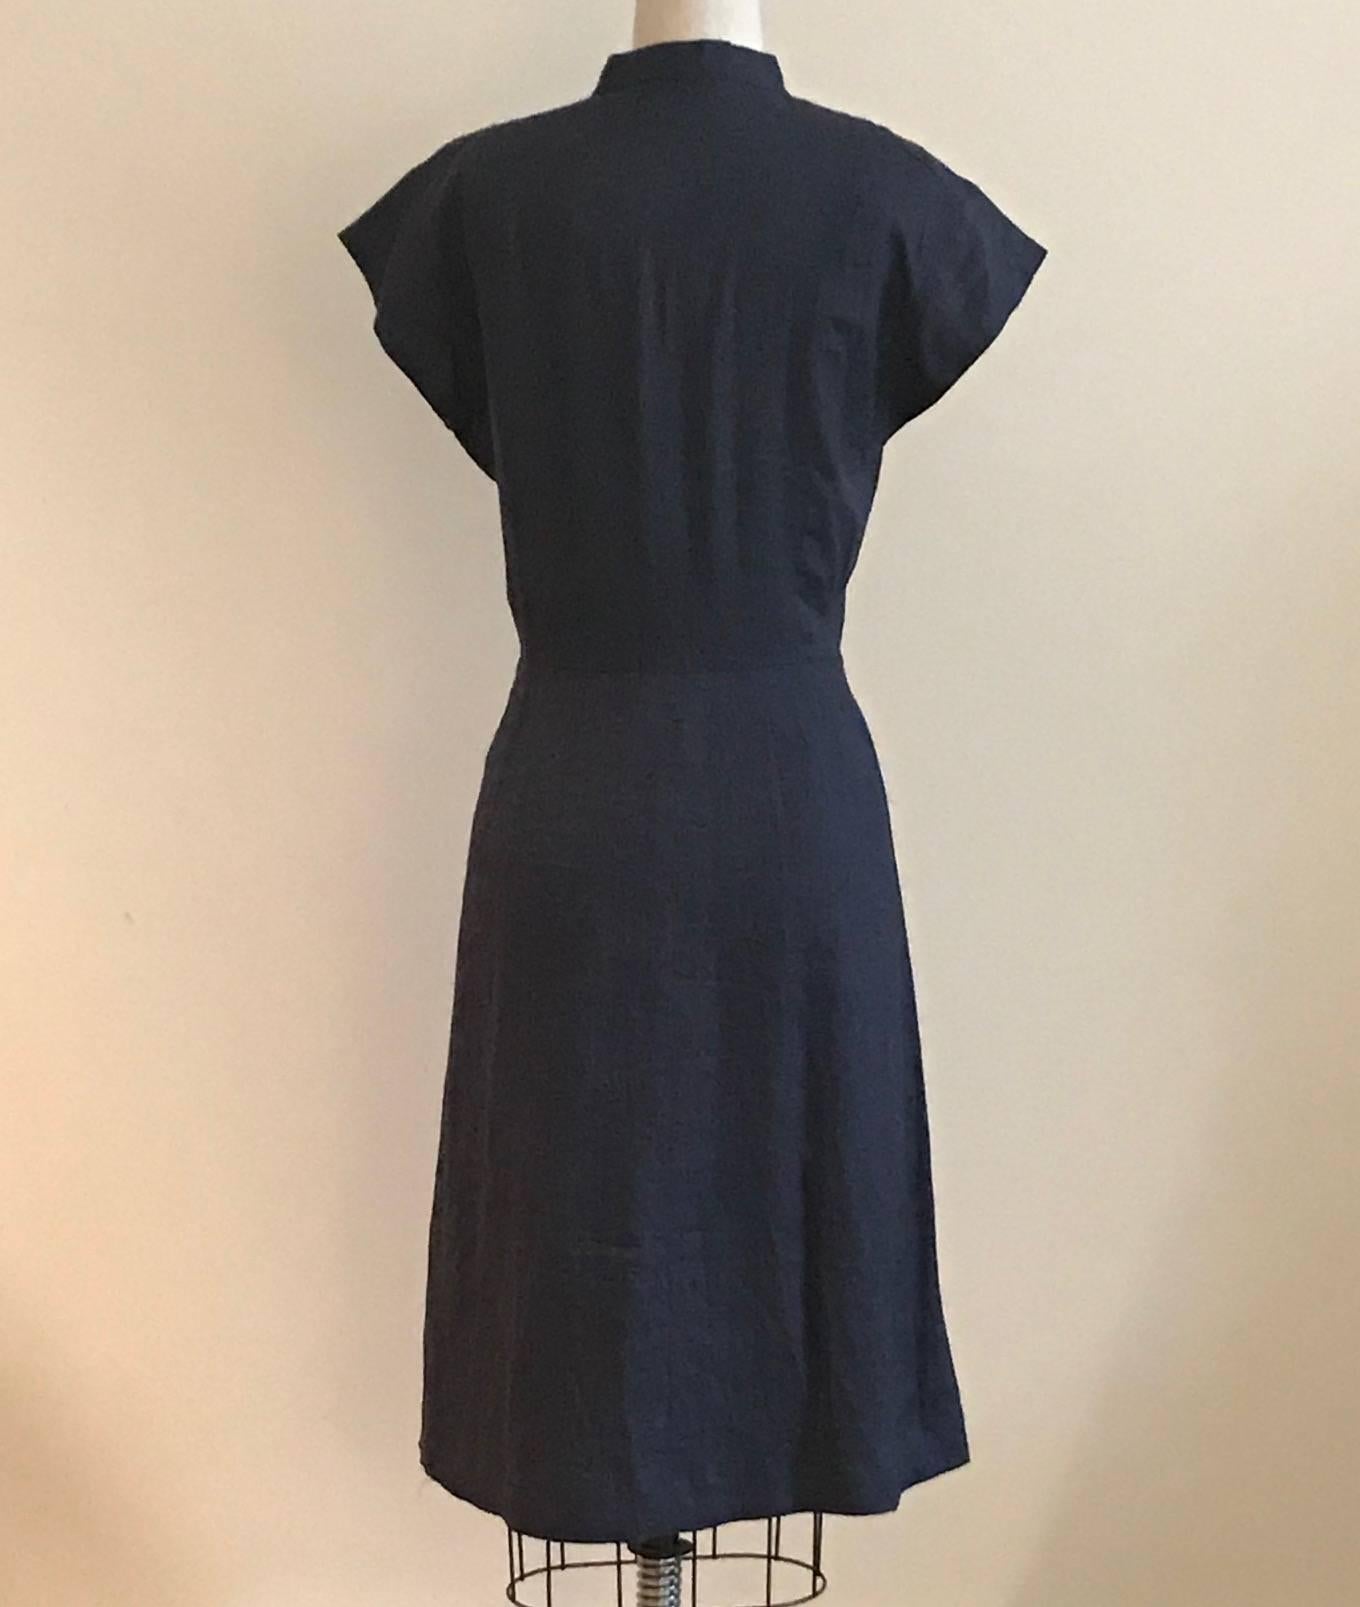 Sorelle Fontana dark blue short sleeve button front shirt dress. Pleating at front skirt. Patch pockets at chest. Navy plastic buttons with a snap at waist. Lined at skirt.

Style seems very 1940s, but may be later. 'Sorelle Fontana, Alta Moda